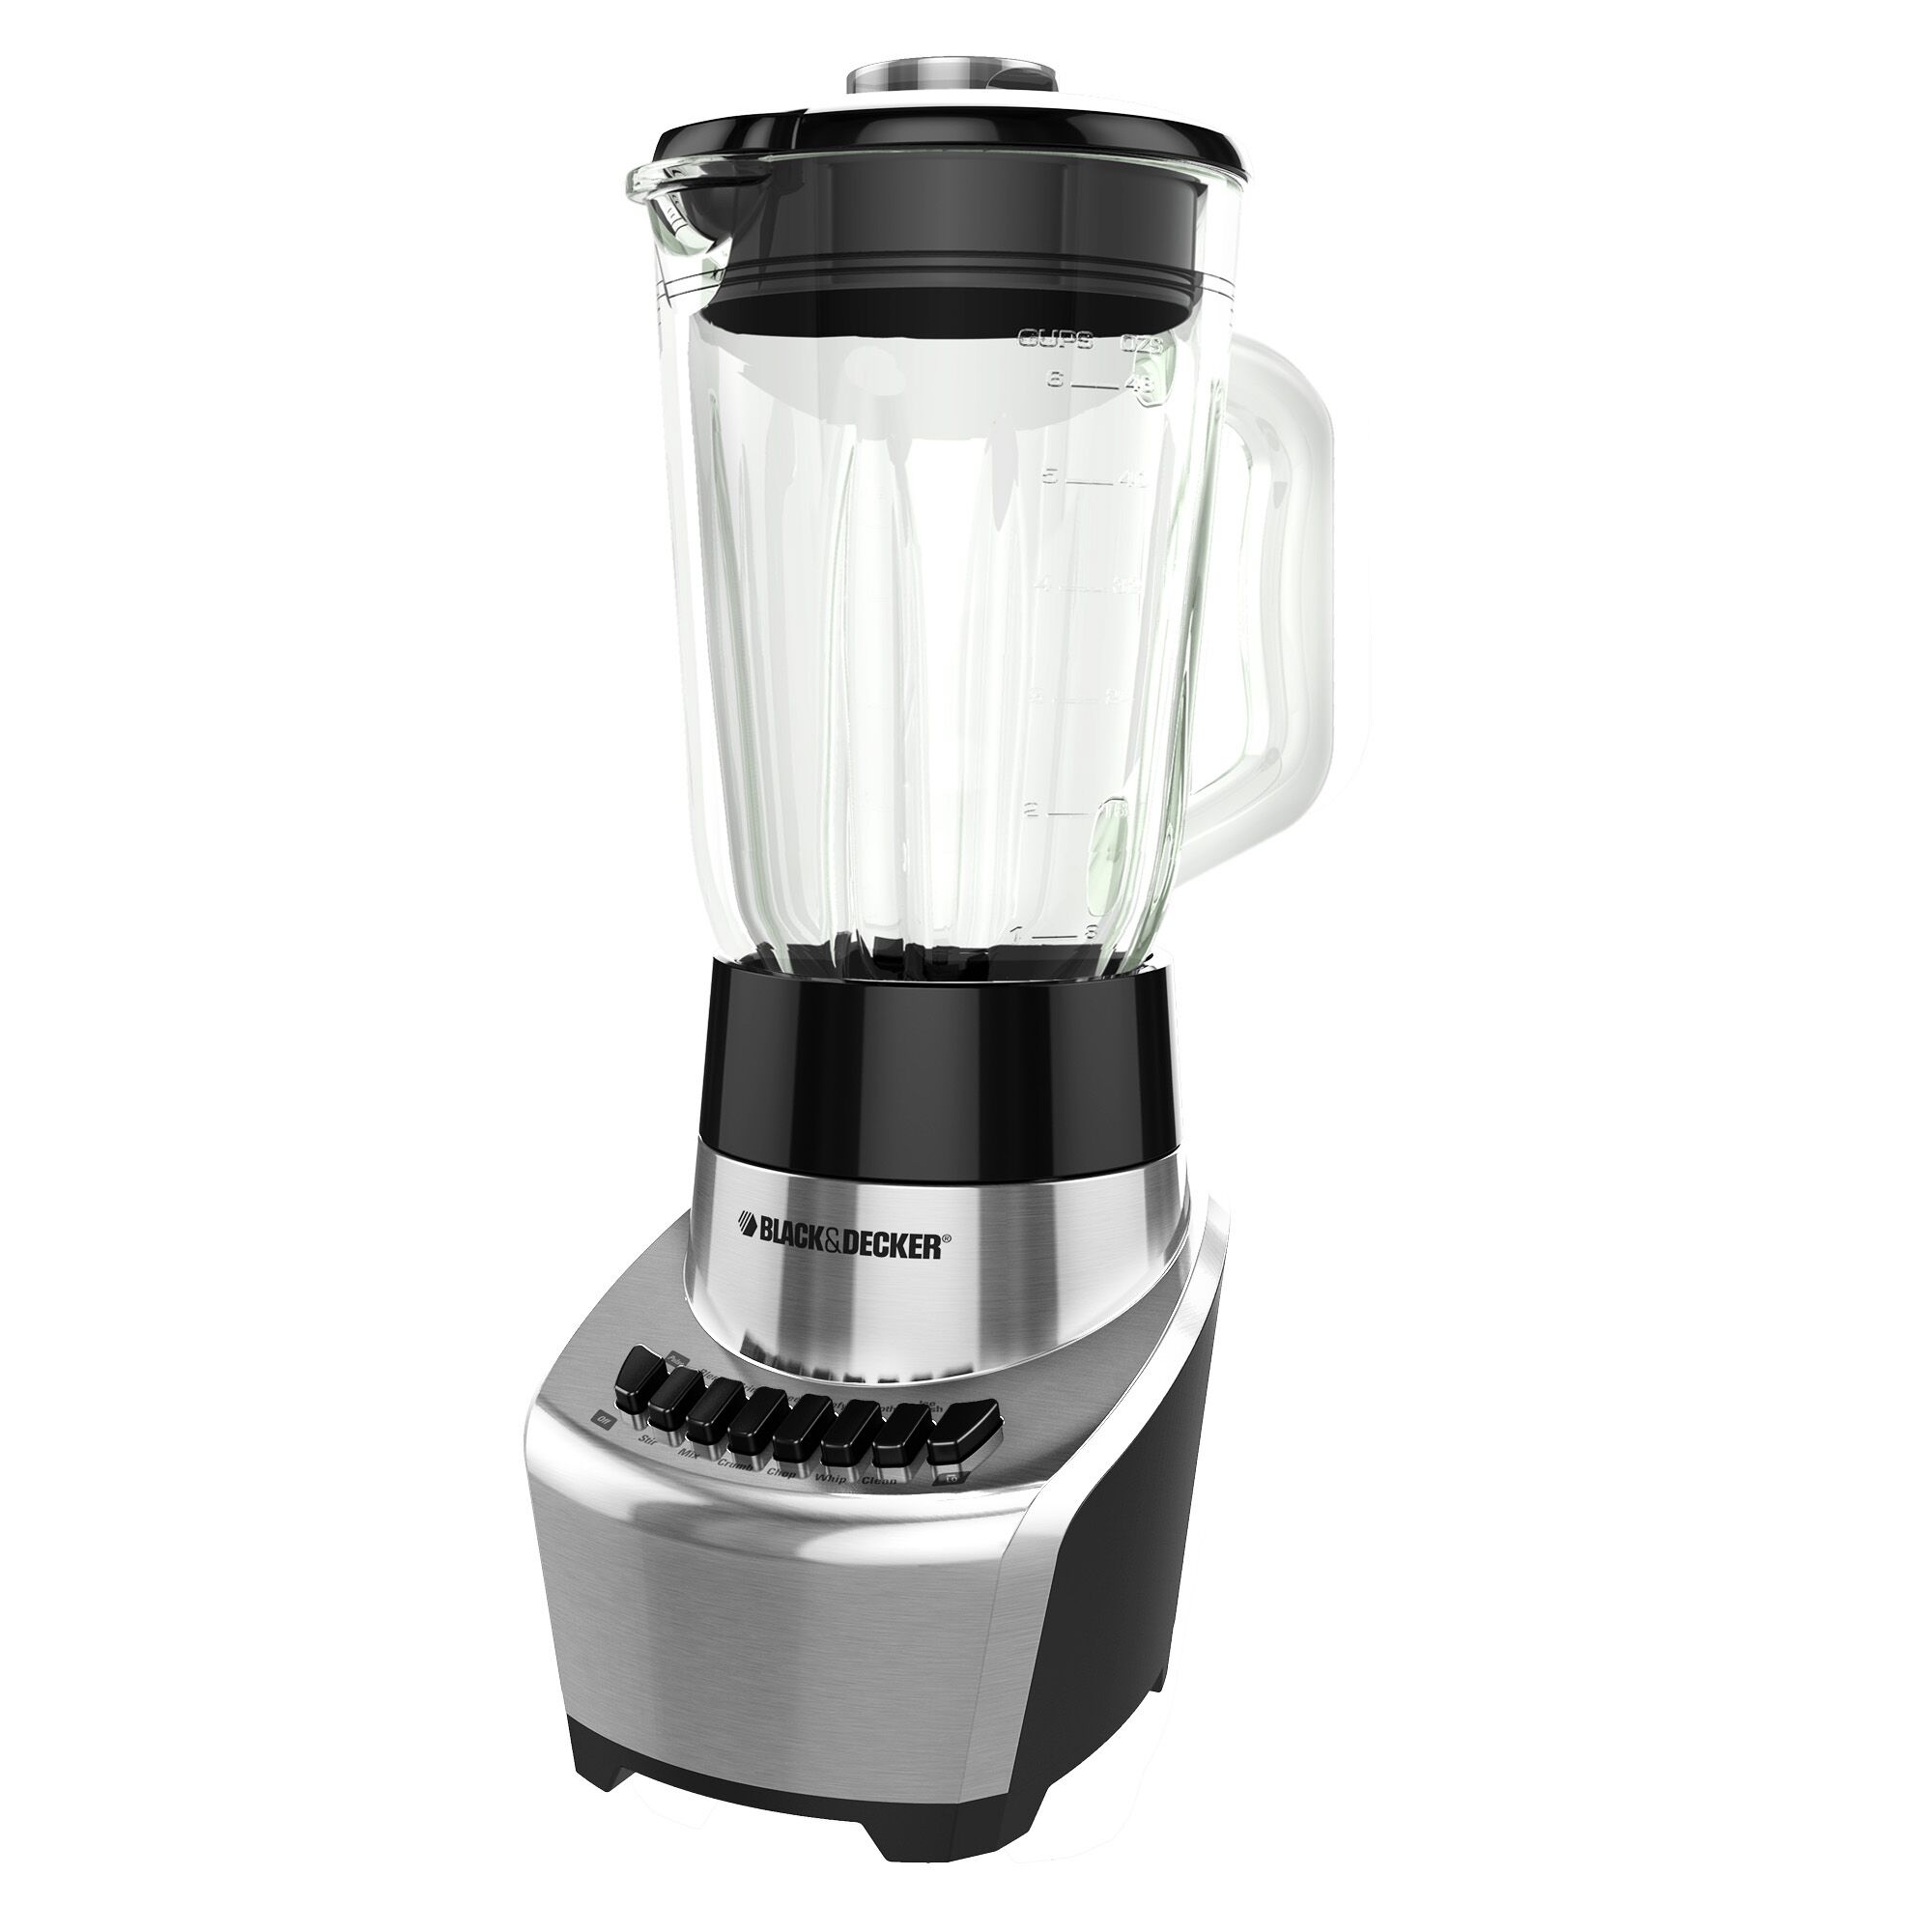 Profile of 12 Speed Fusion Blade Blender.